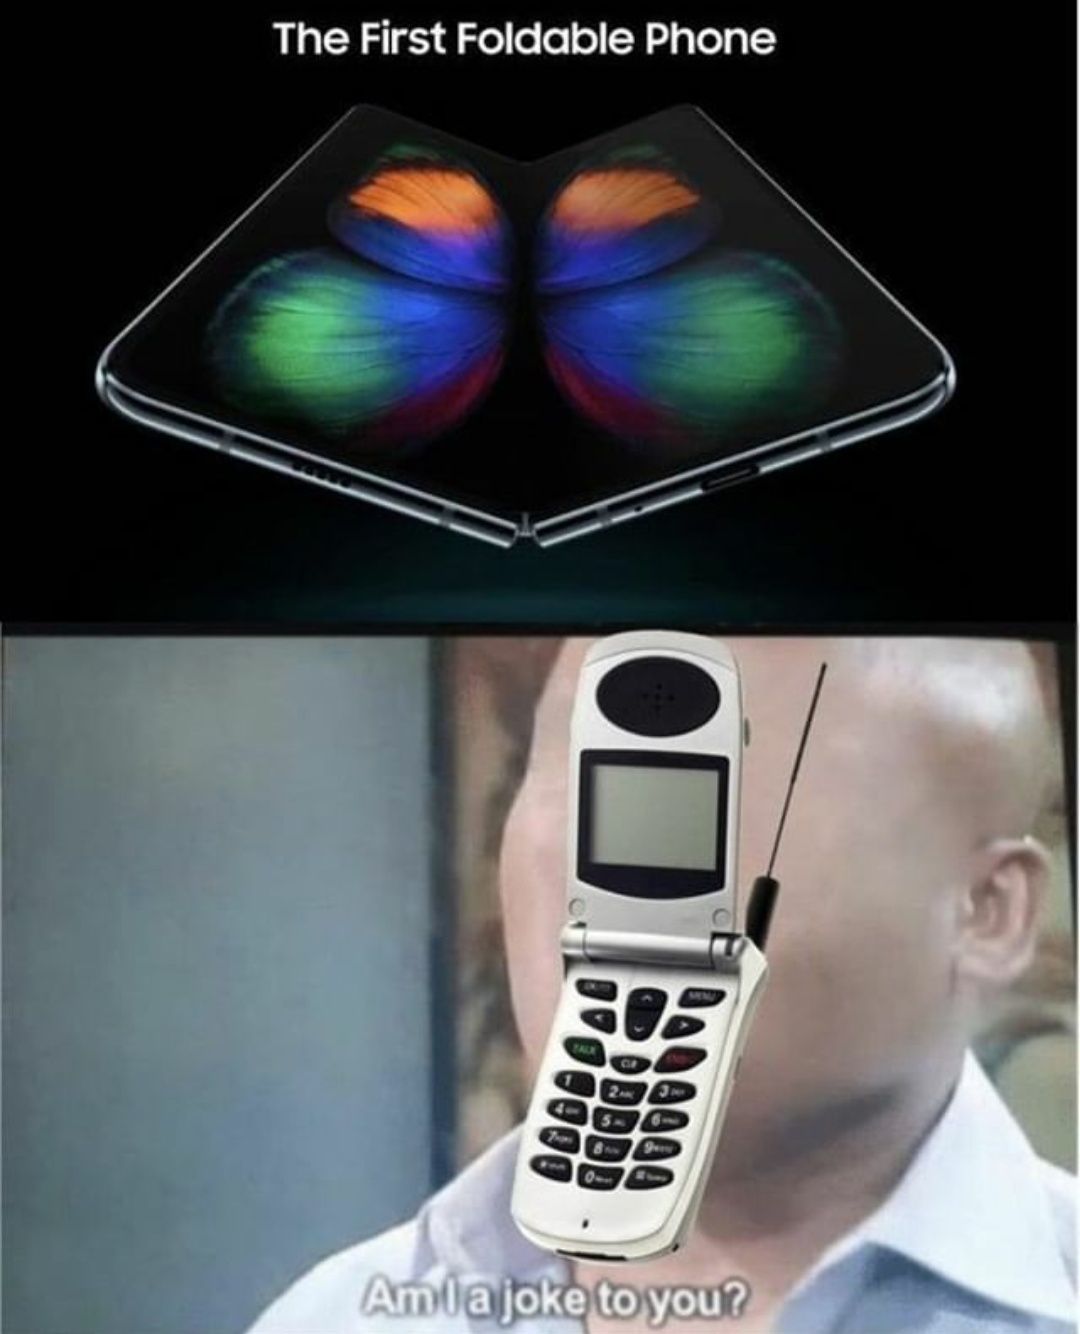 *nokia left the chat*